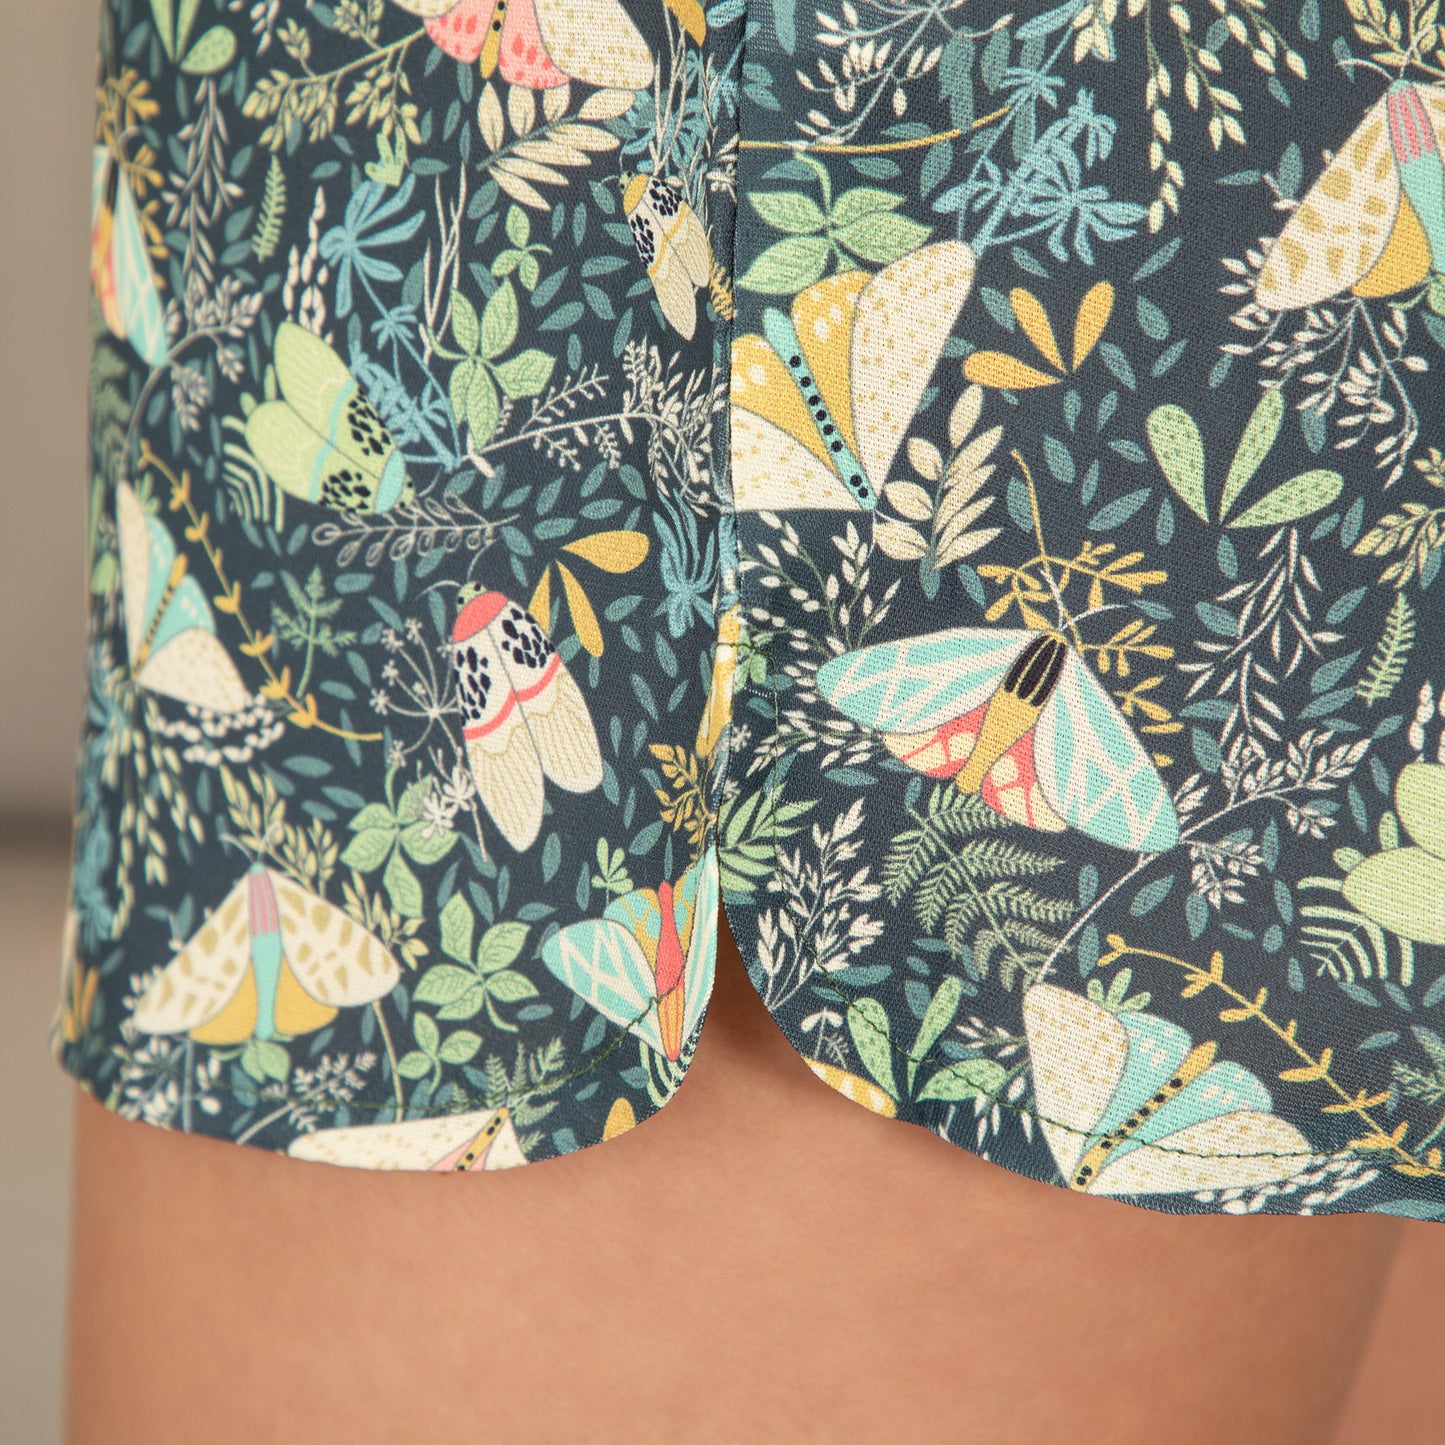 Animal All Over Fashion Shorts